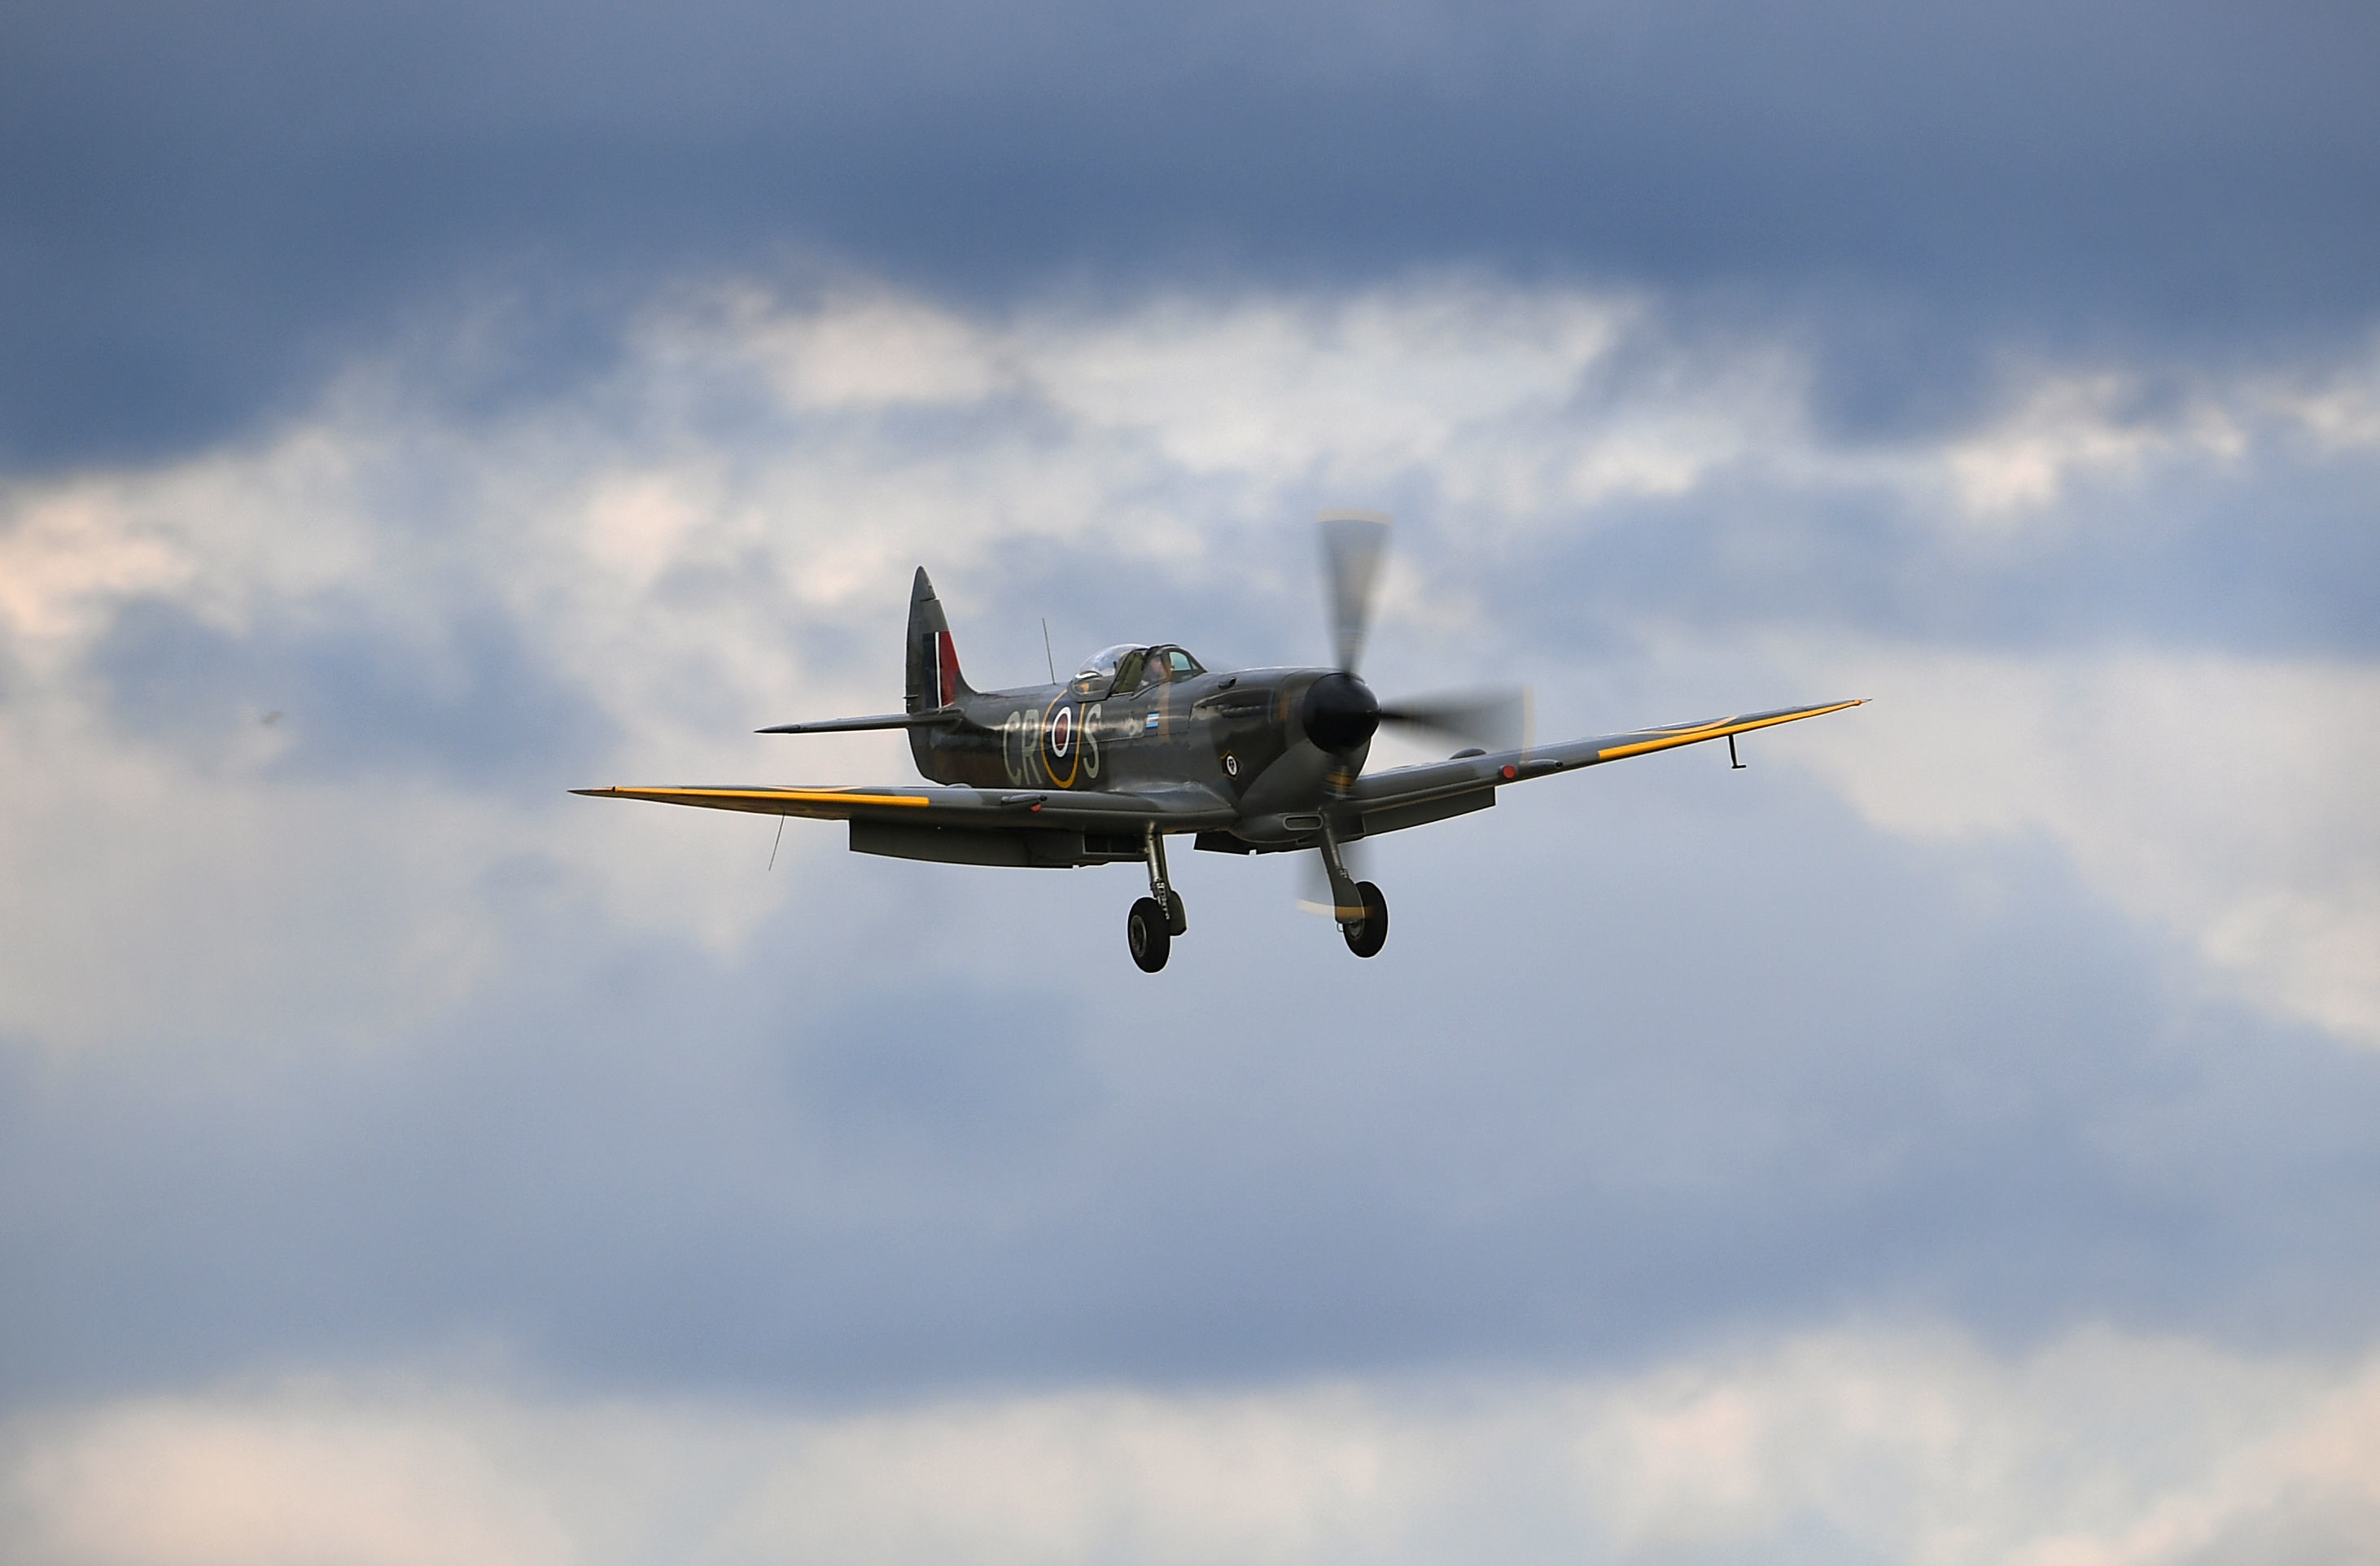 A Supermarine Spitfire comes in to land